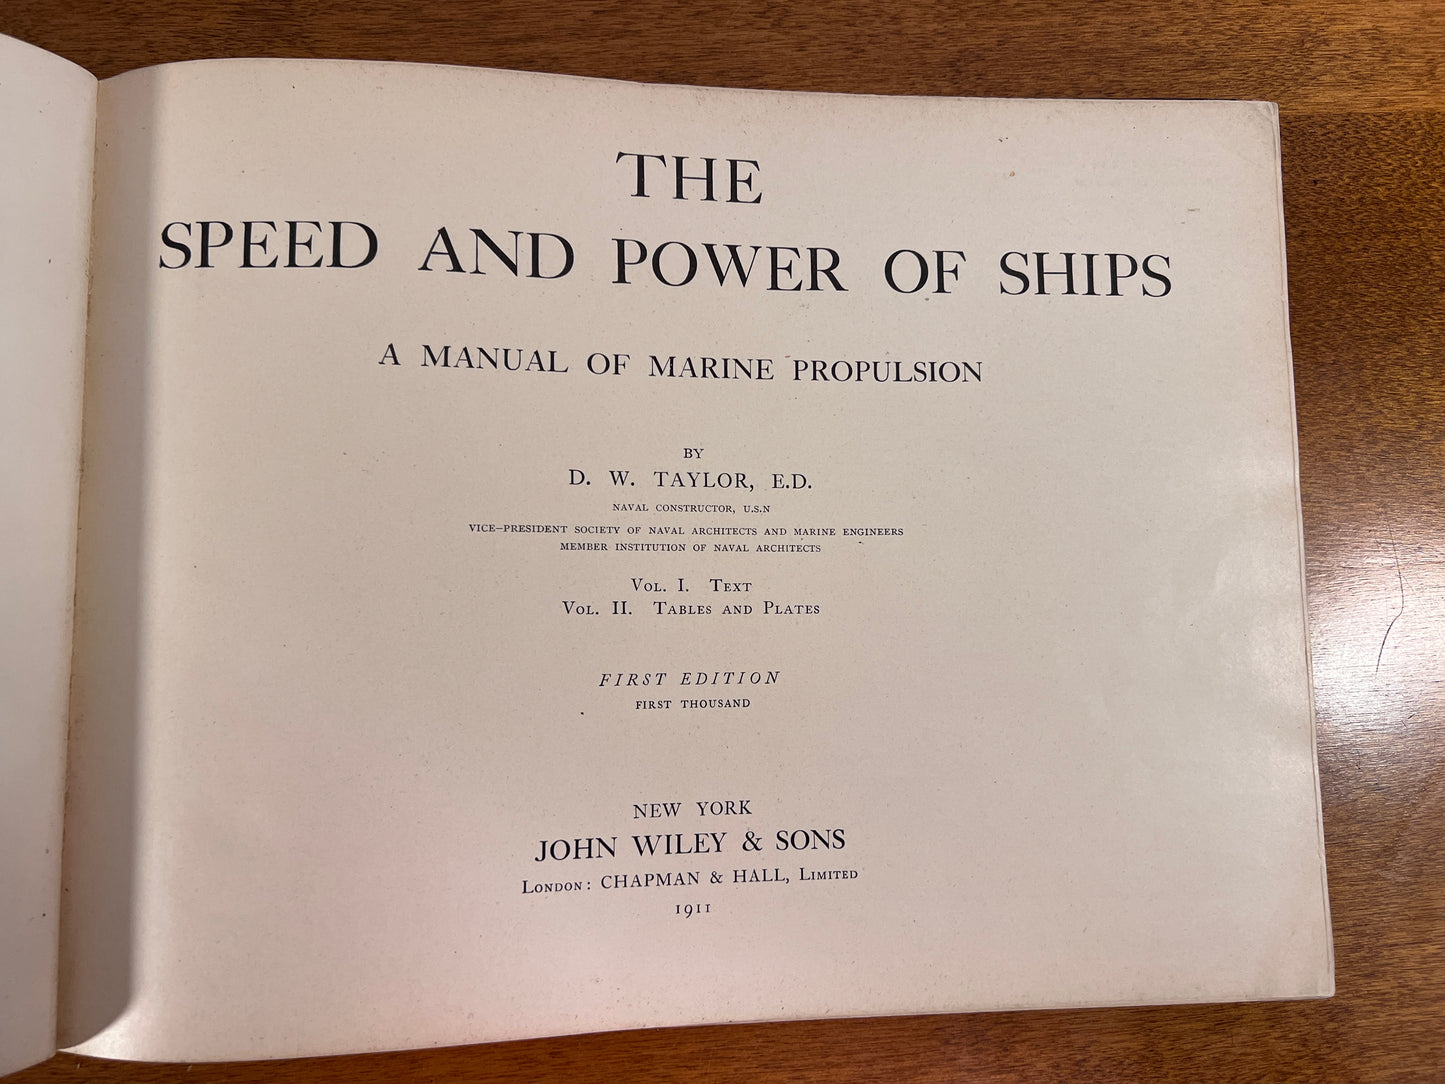 Speed and Power of Ships A Manual of Marine Propulsion Tables and Plates Vol II by D. W. Taylor